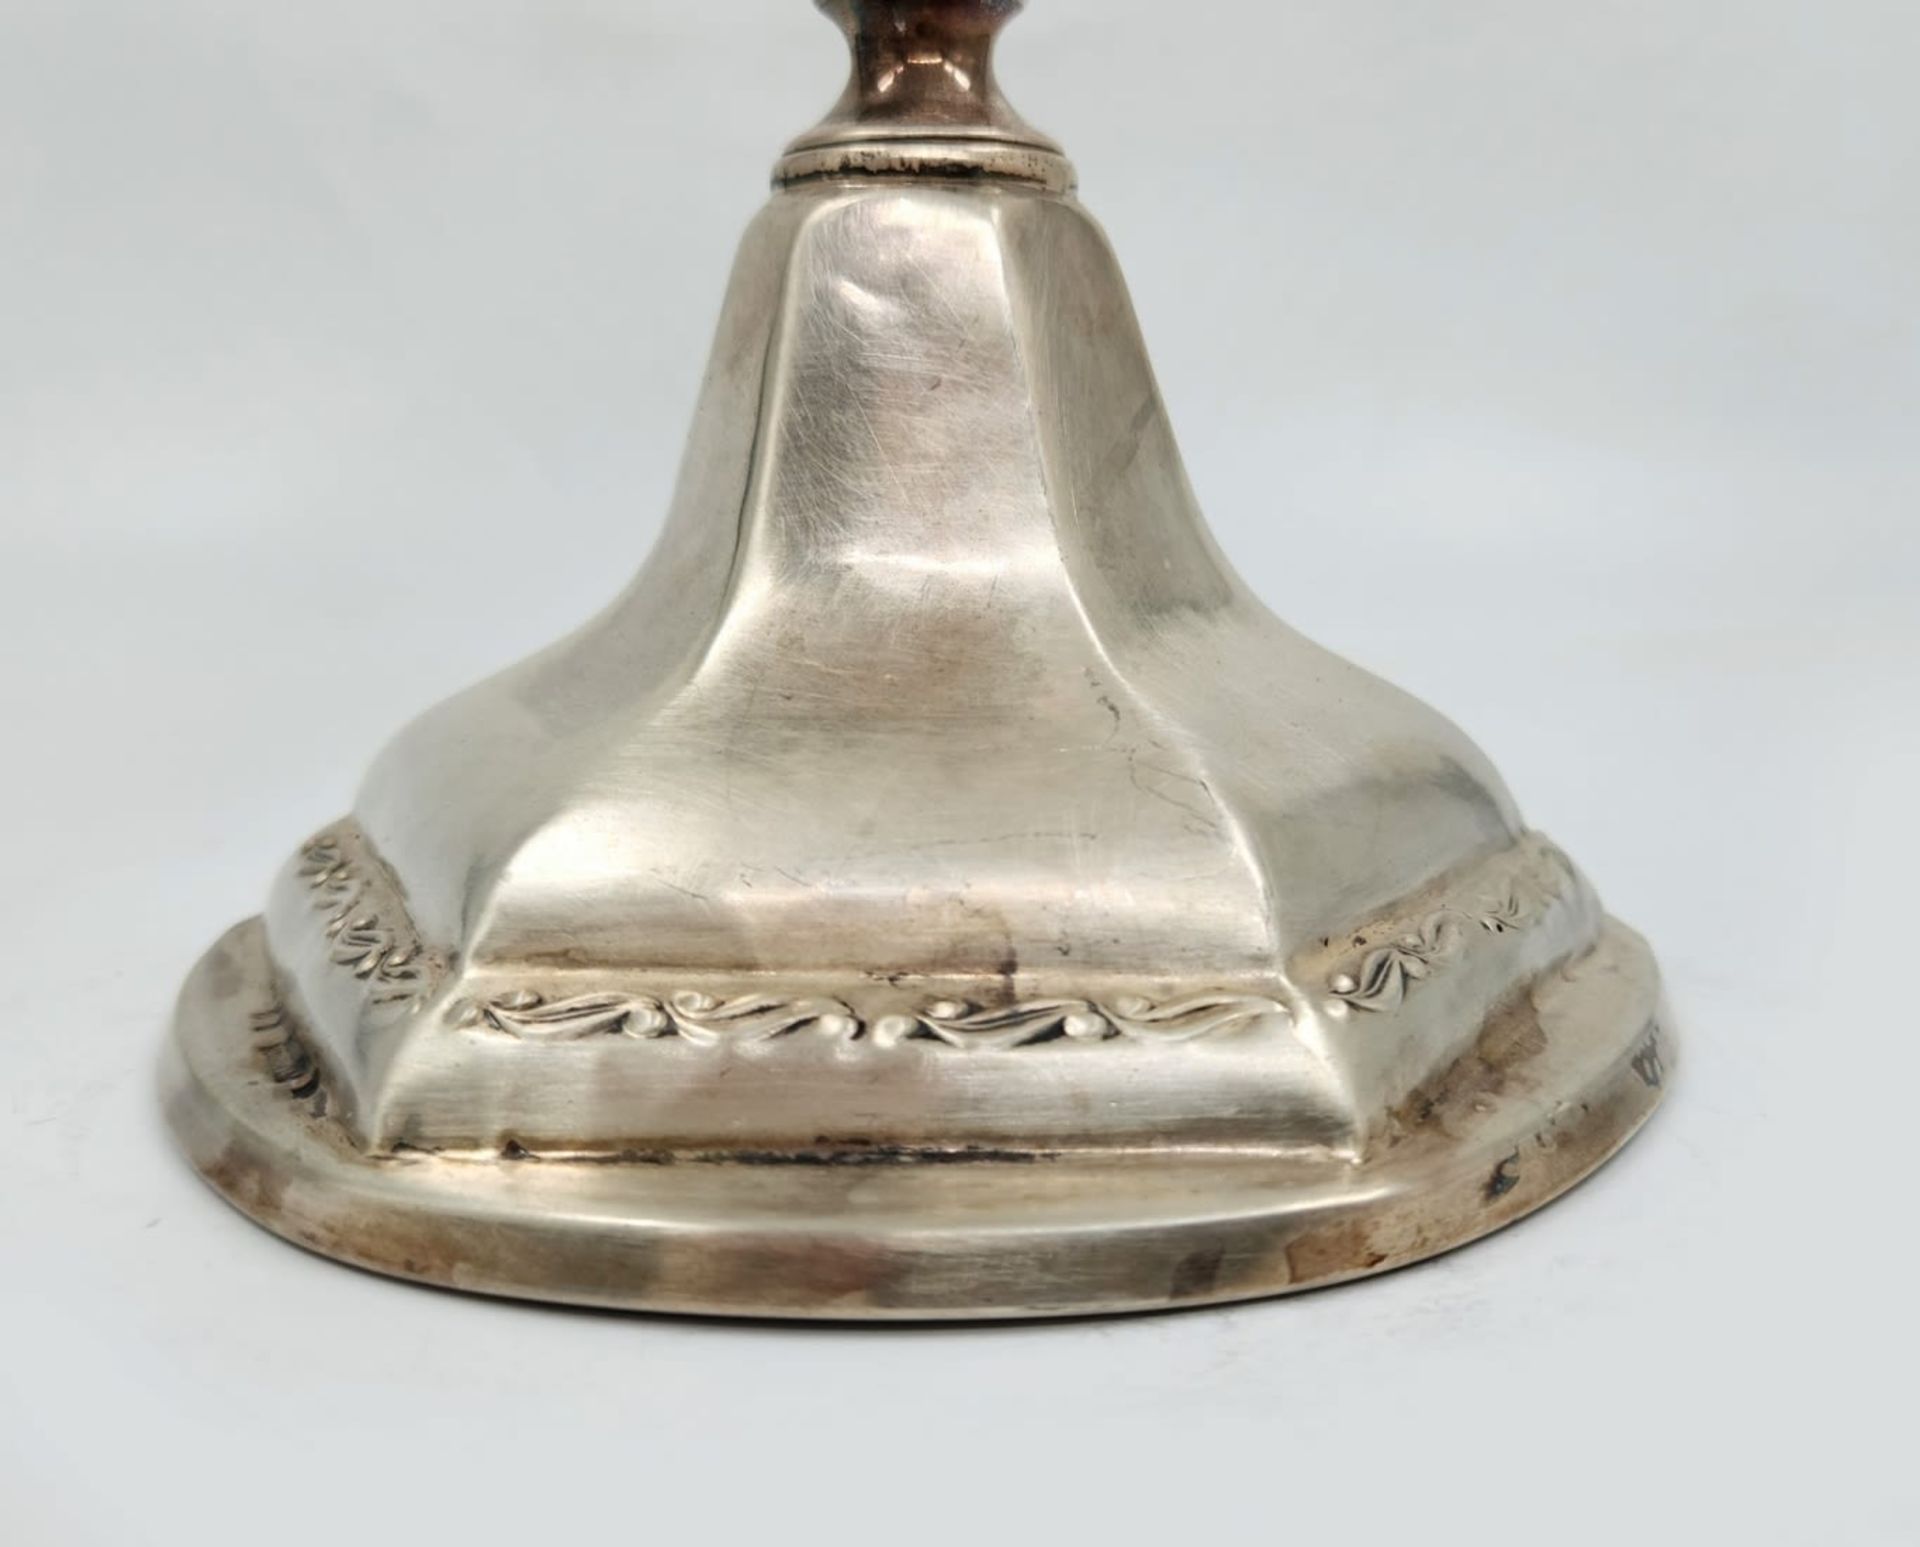 A silver candlestick for five candles, made by the 'Hazorifim' company, made of '800' silver, - Image 6 of 8